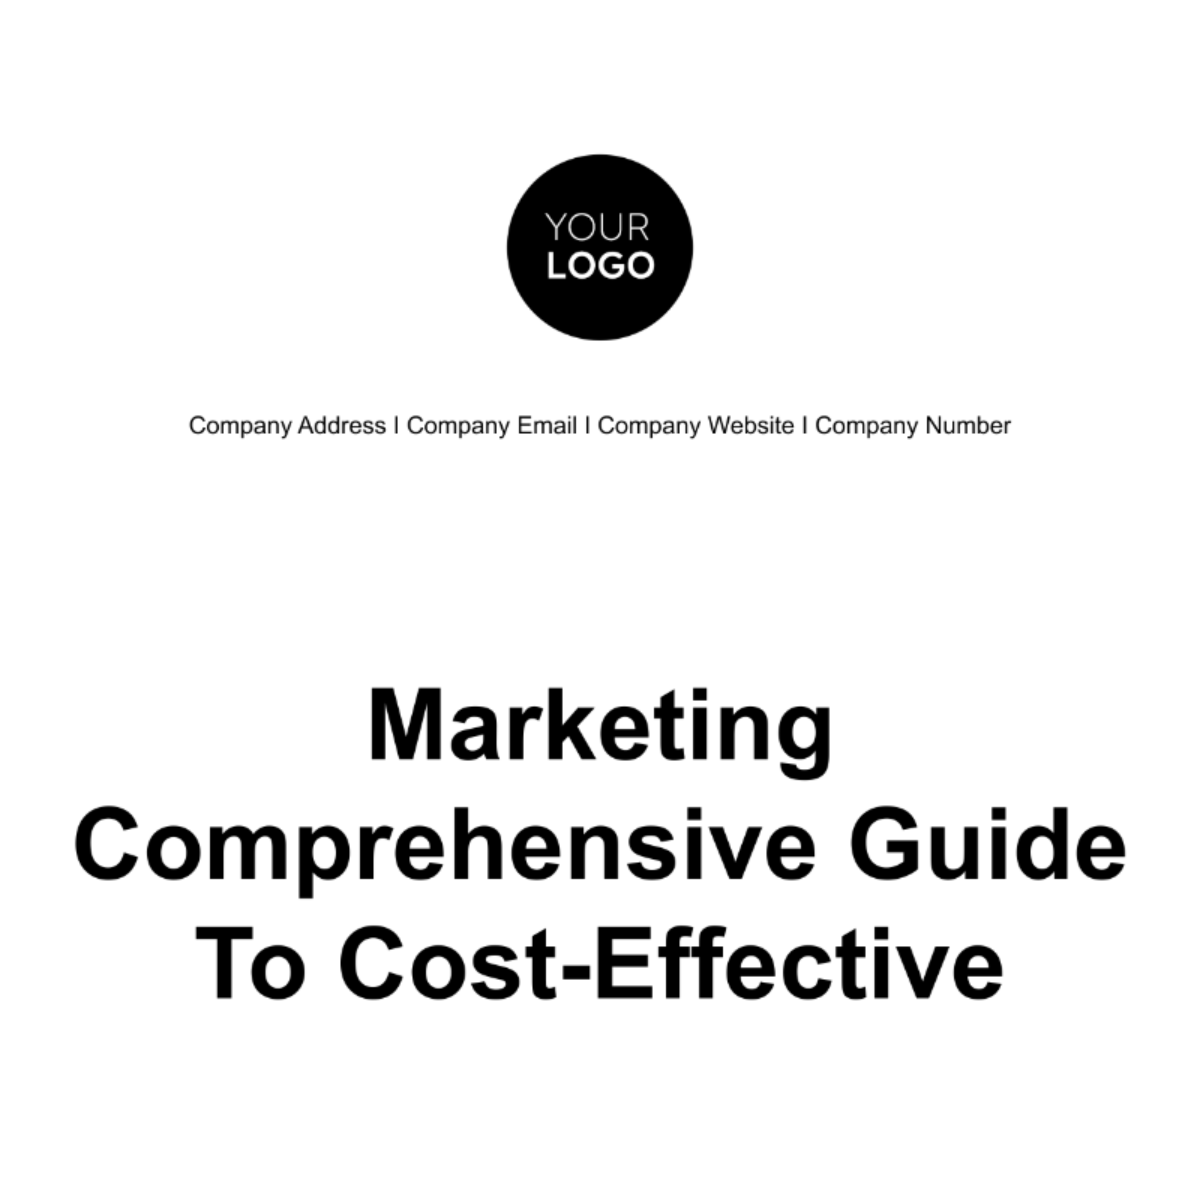 Free Marketing Comprehensive Guide to Cost-Effective Template